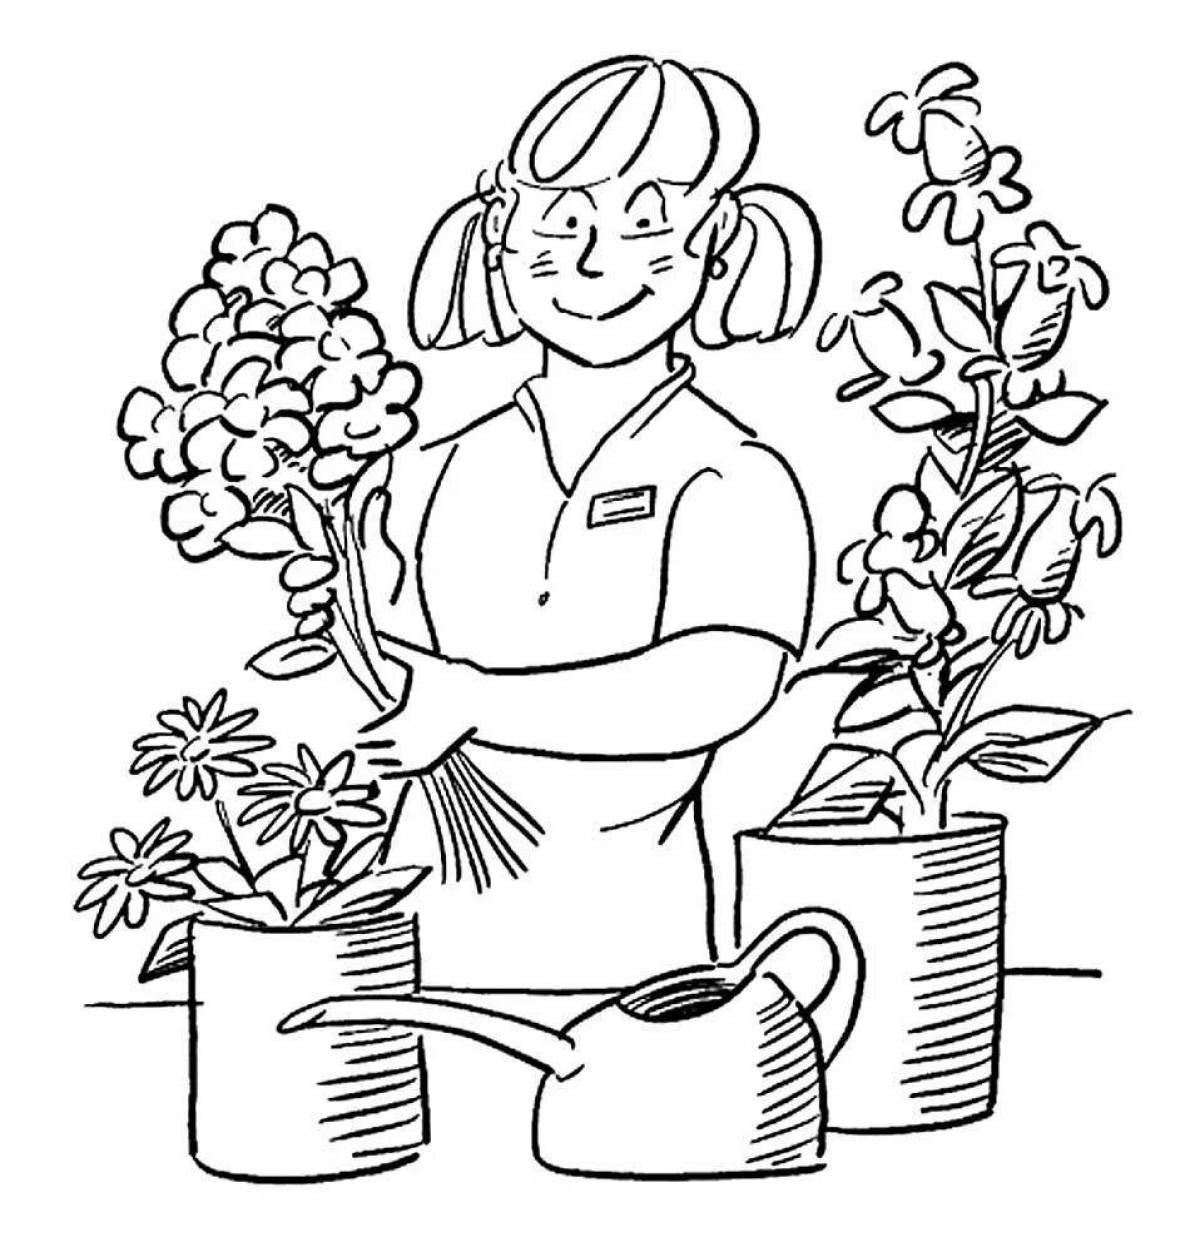 Coloring page cheerful gardener